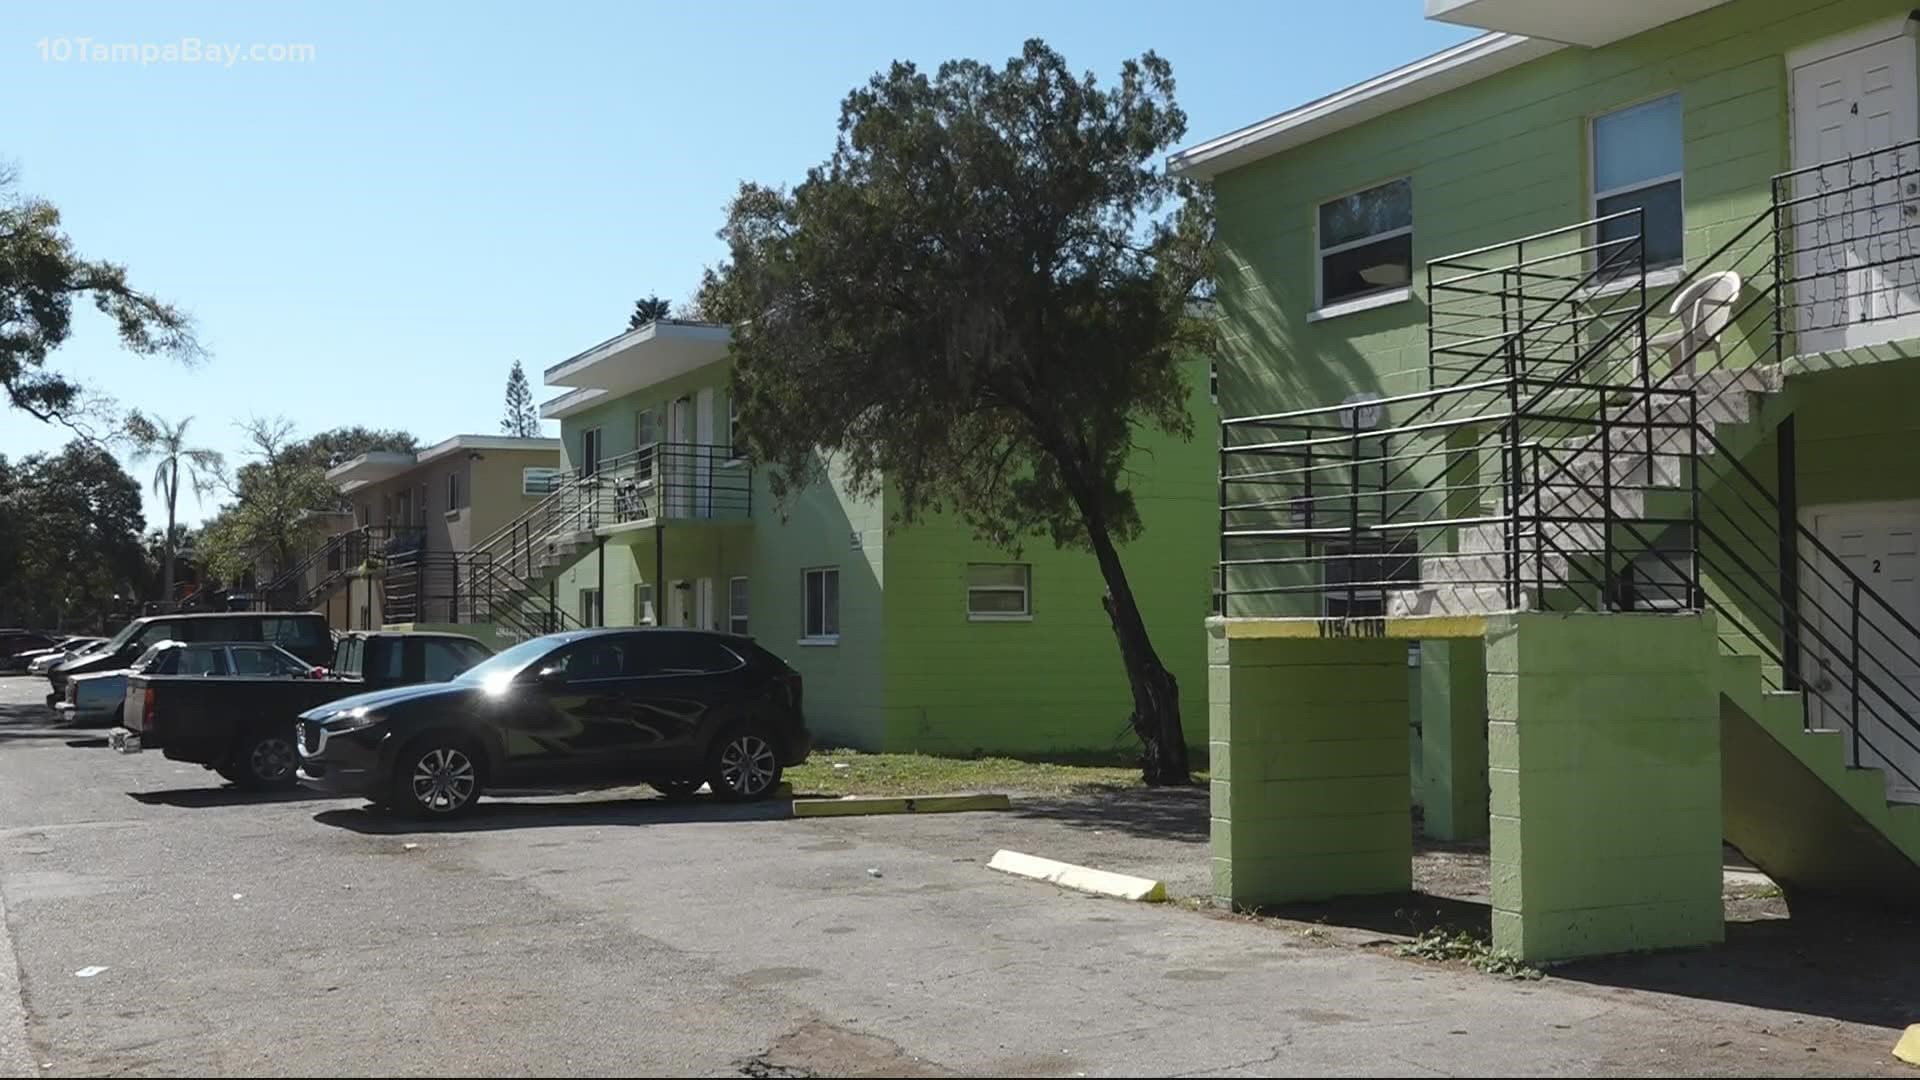 The money will help acquire no less than 12 units on Russell Street in St. Petersburg.